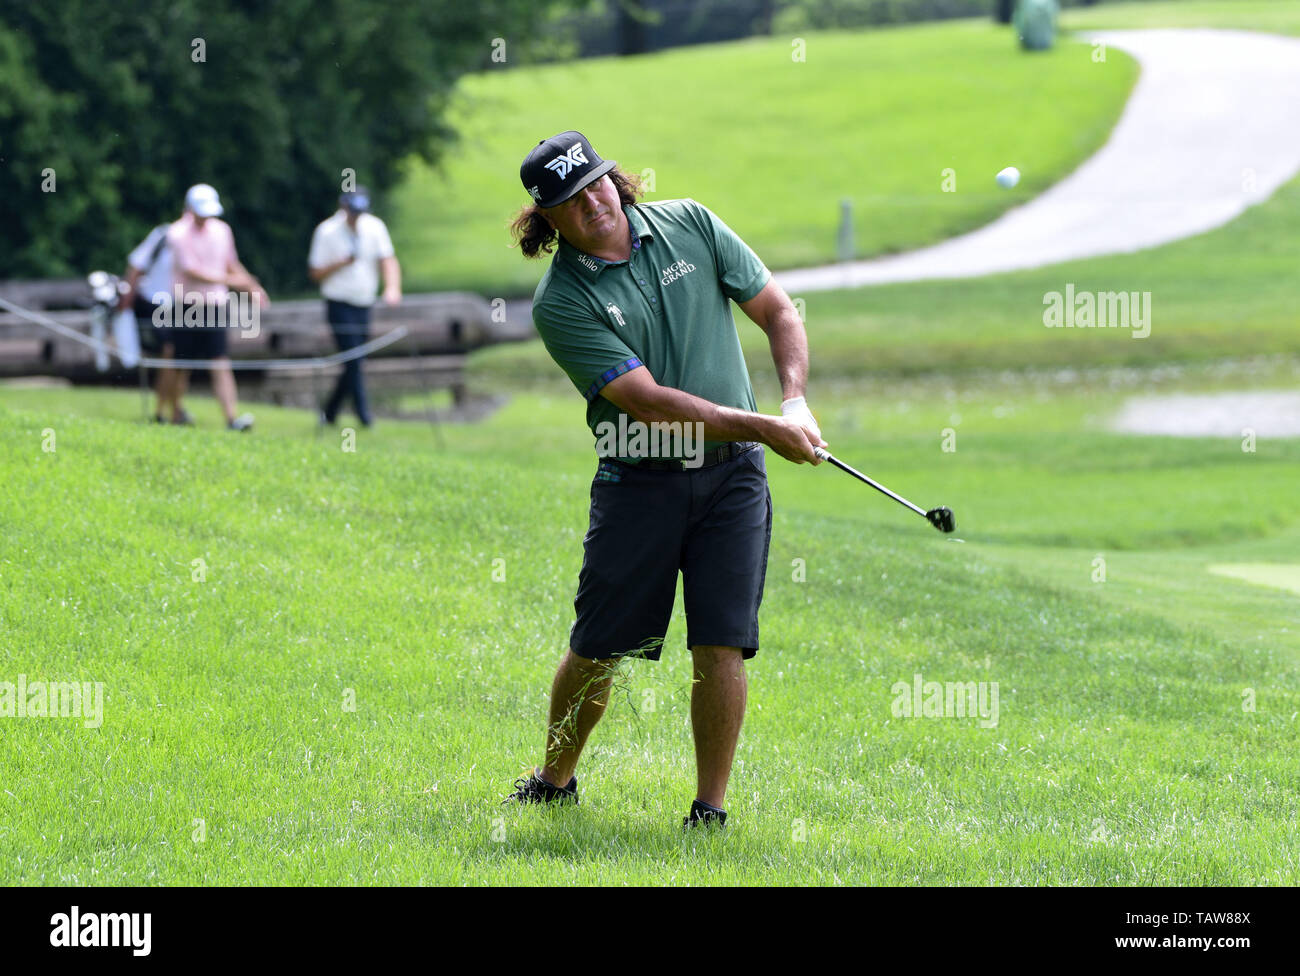 Dublin, OH, USA. 27th May, 2019. Pat Perez plays a shot on the 9th hole during practice round play at the 2019 Memorial Day Tournament presented by Nationwide at Muirfield Village Golf Club in Dublin, OH. Austyn McFadden/CSM/Alamy Live News Stock Photo